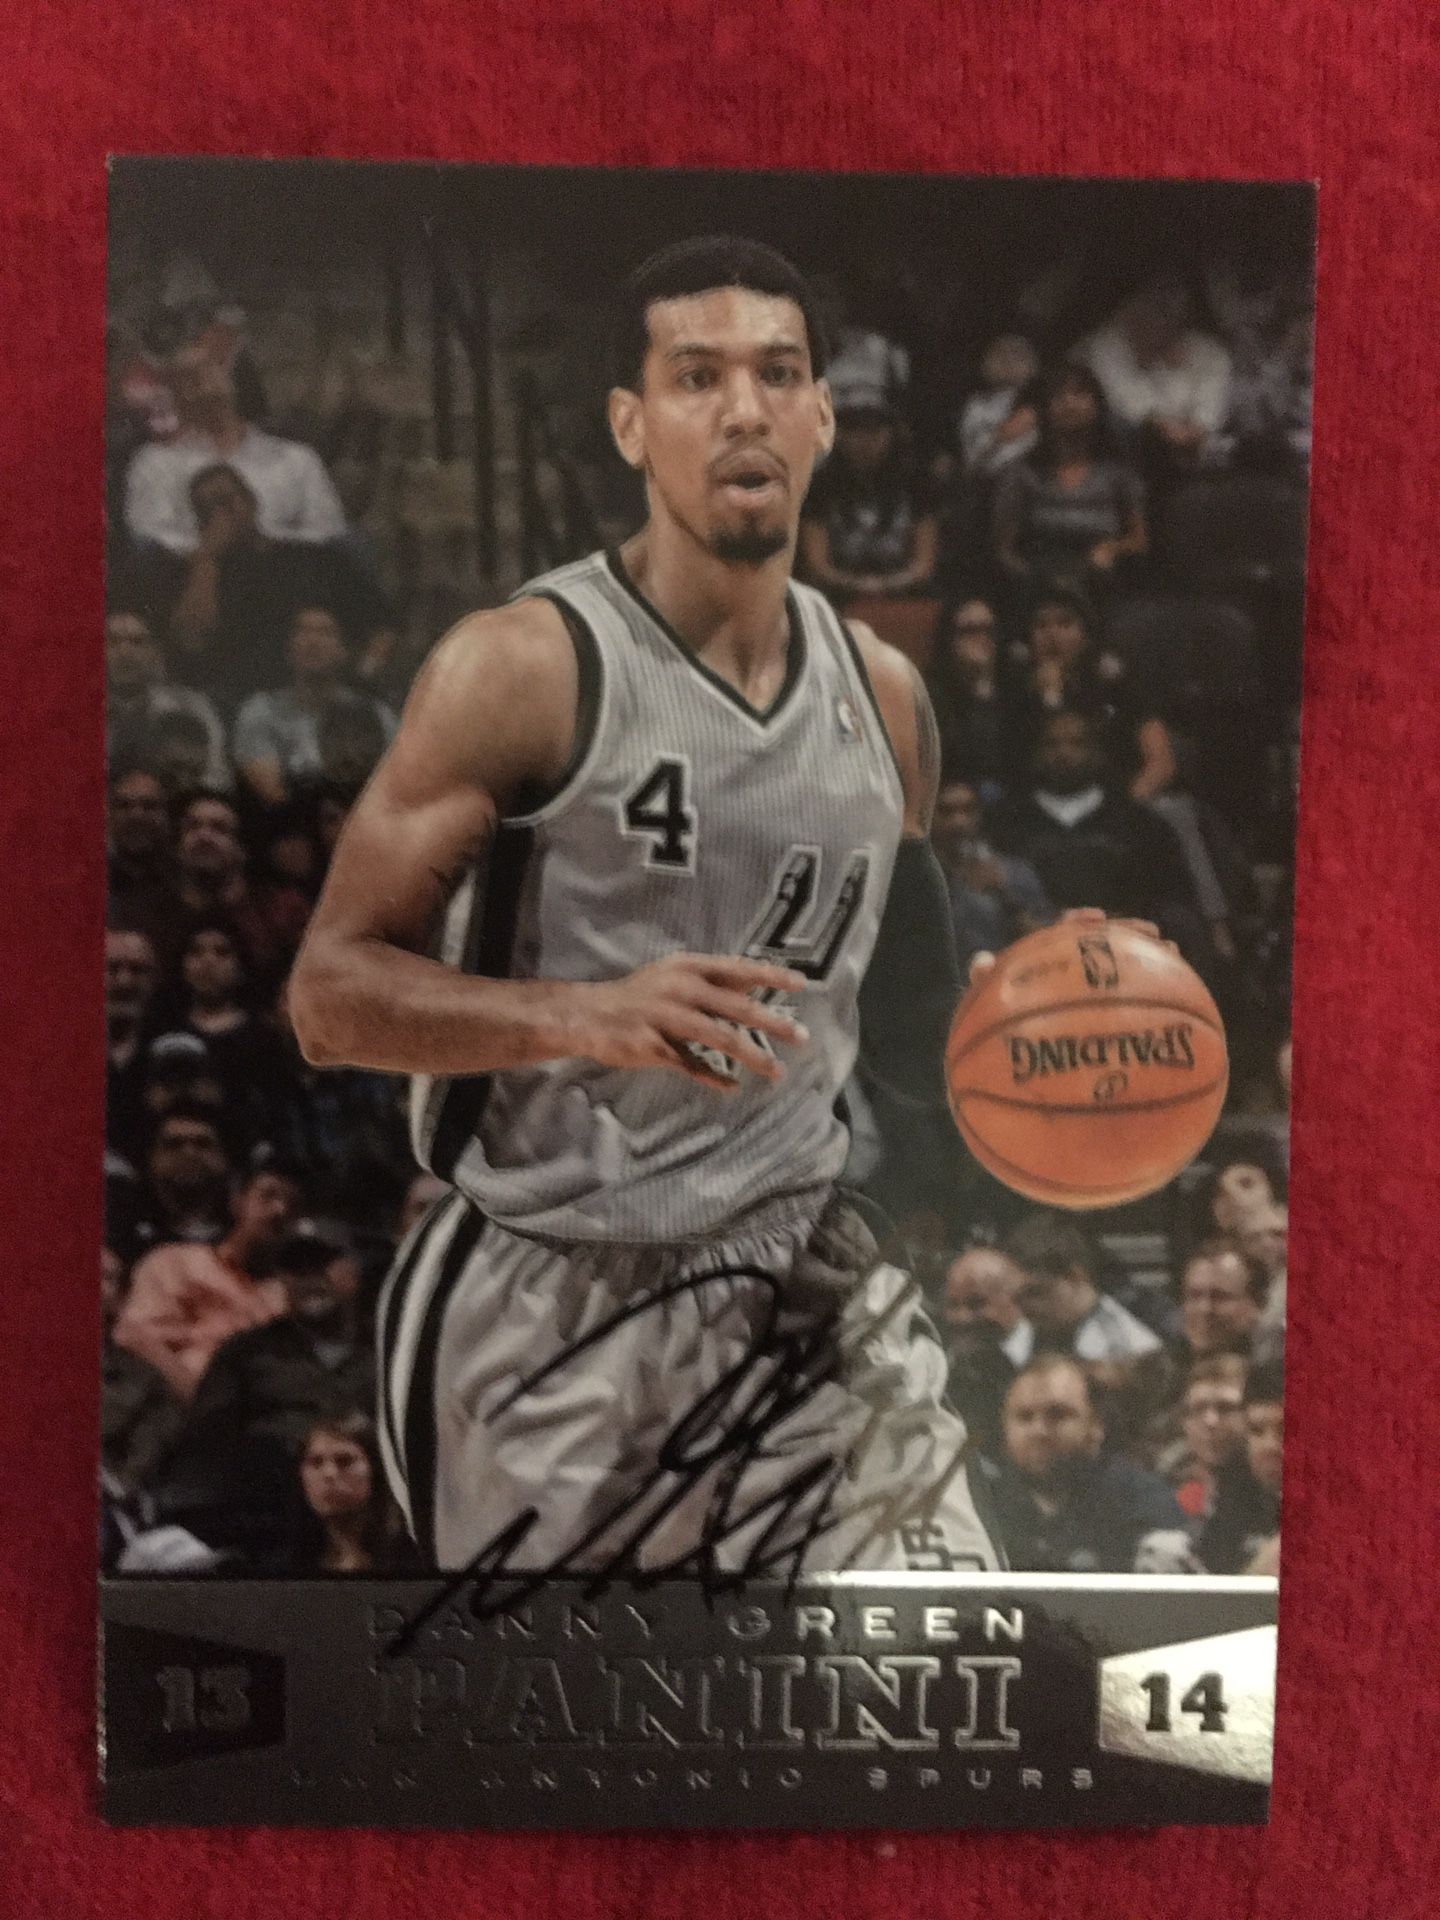 Autograph Card Signed By Nba Star Danny Green.